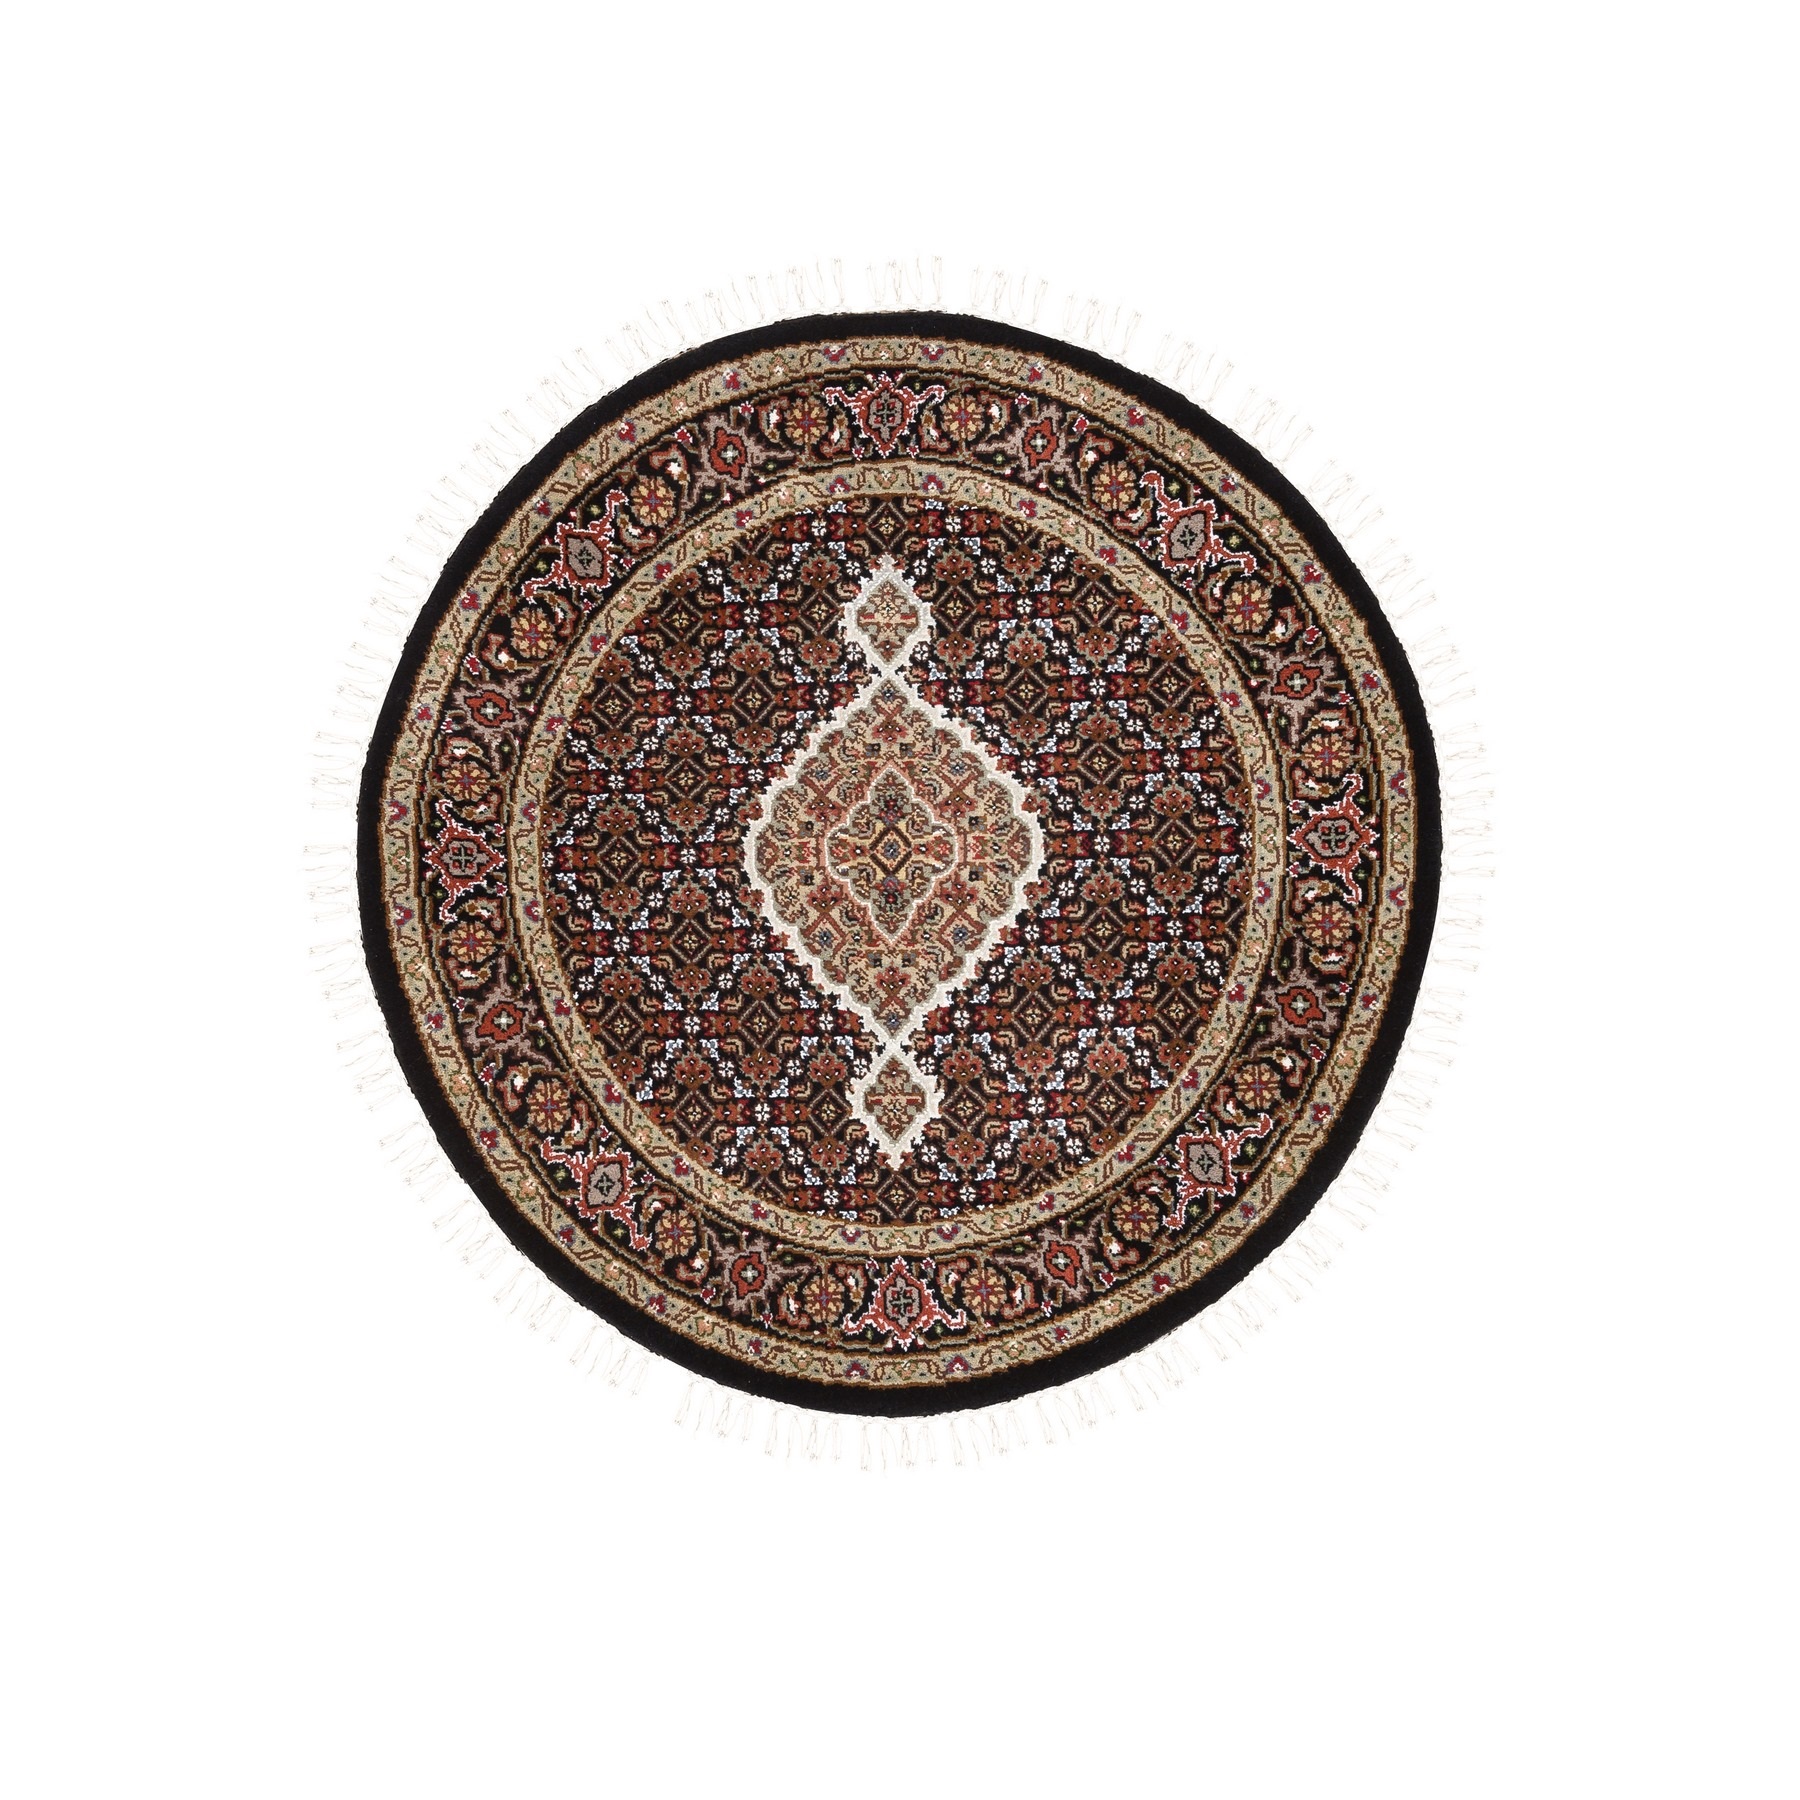 Pirniakan Collection Hand Knotted Black Rug No: 1124898